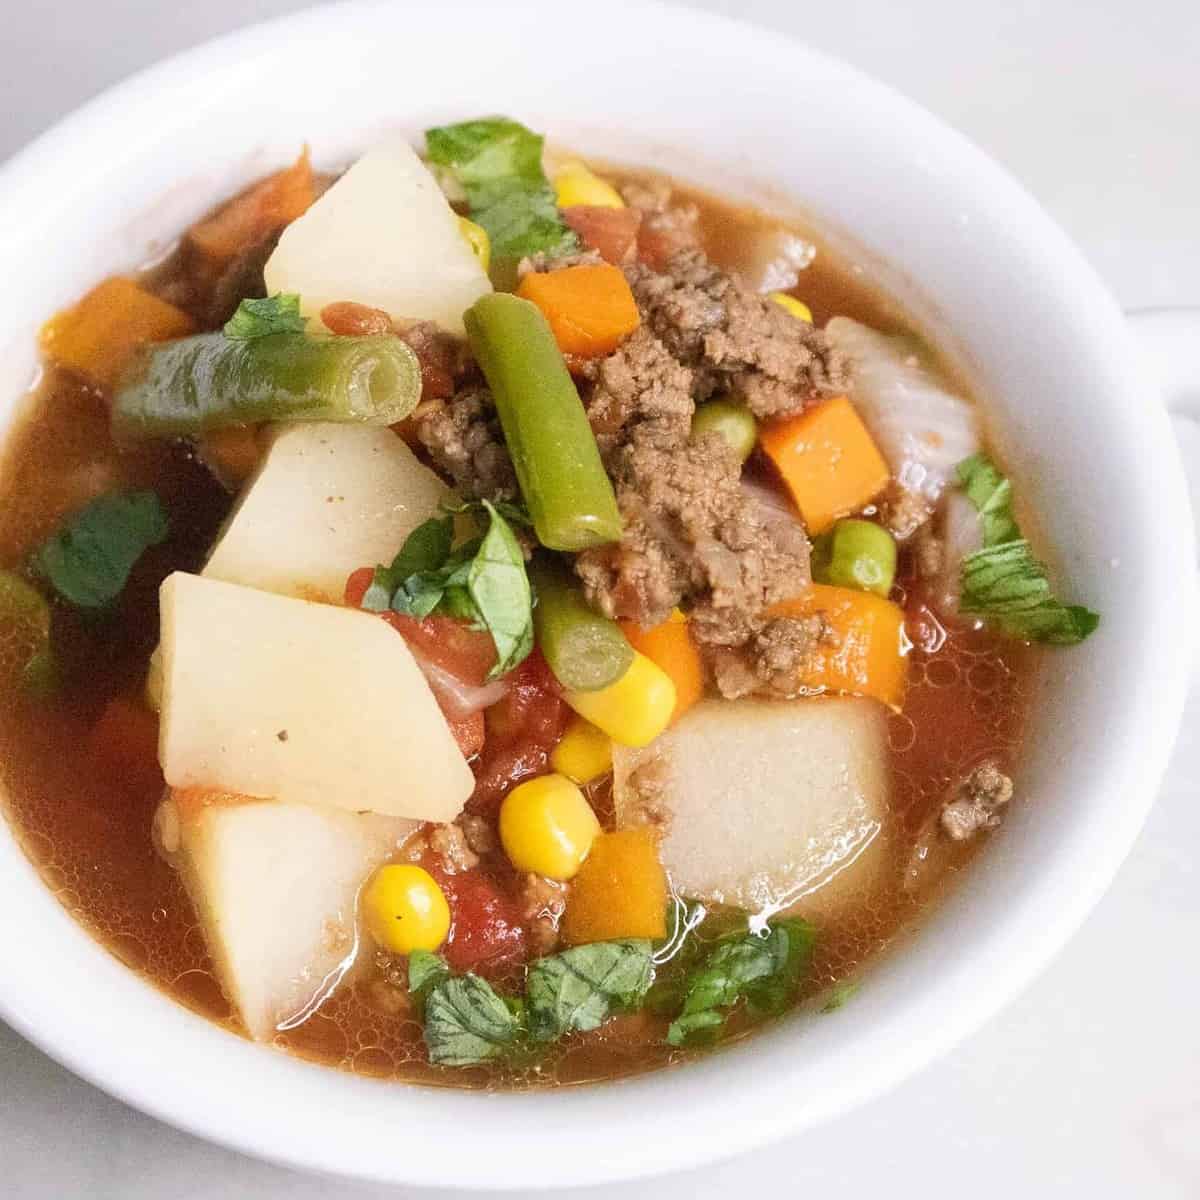  Hearty and flavorful, this Poor Man's Soup is a budget-friendly vegetarian recipe that will warm you up from the inside out.